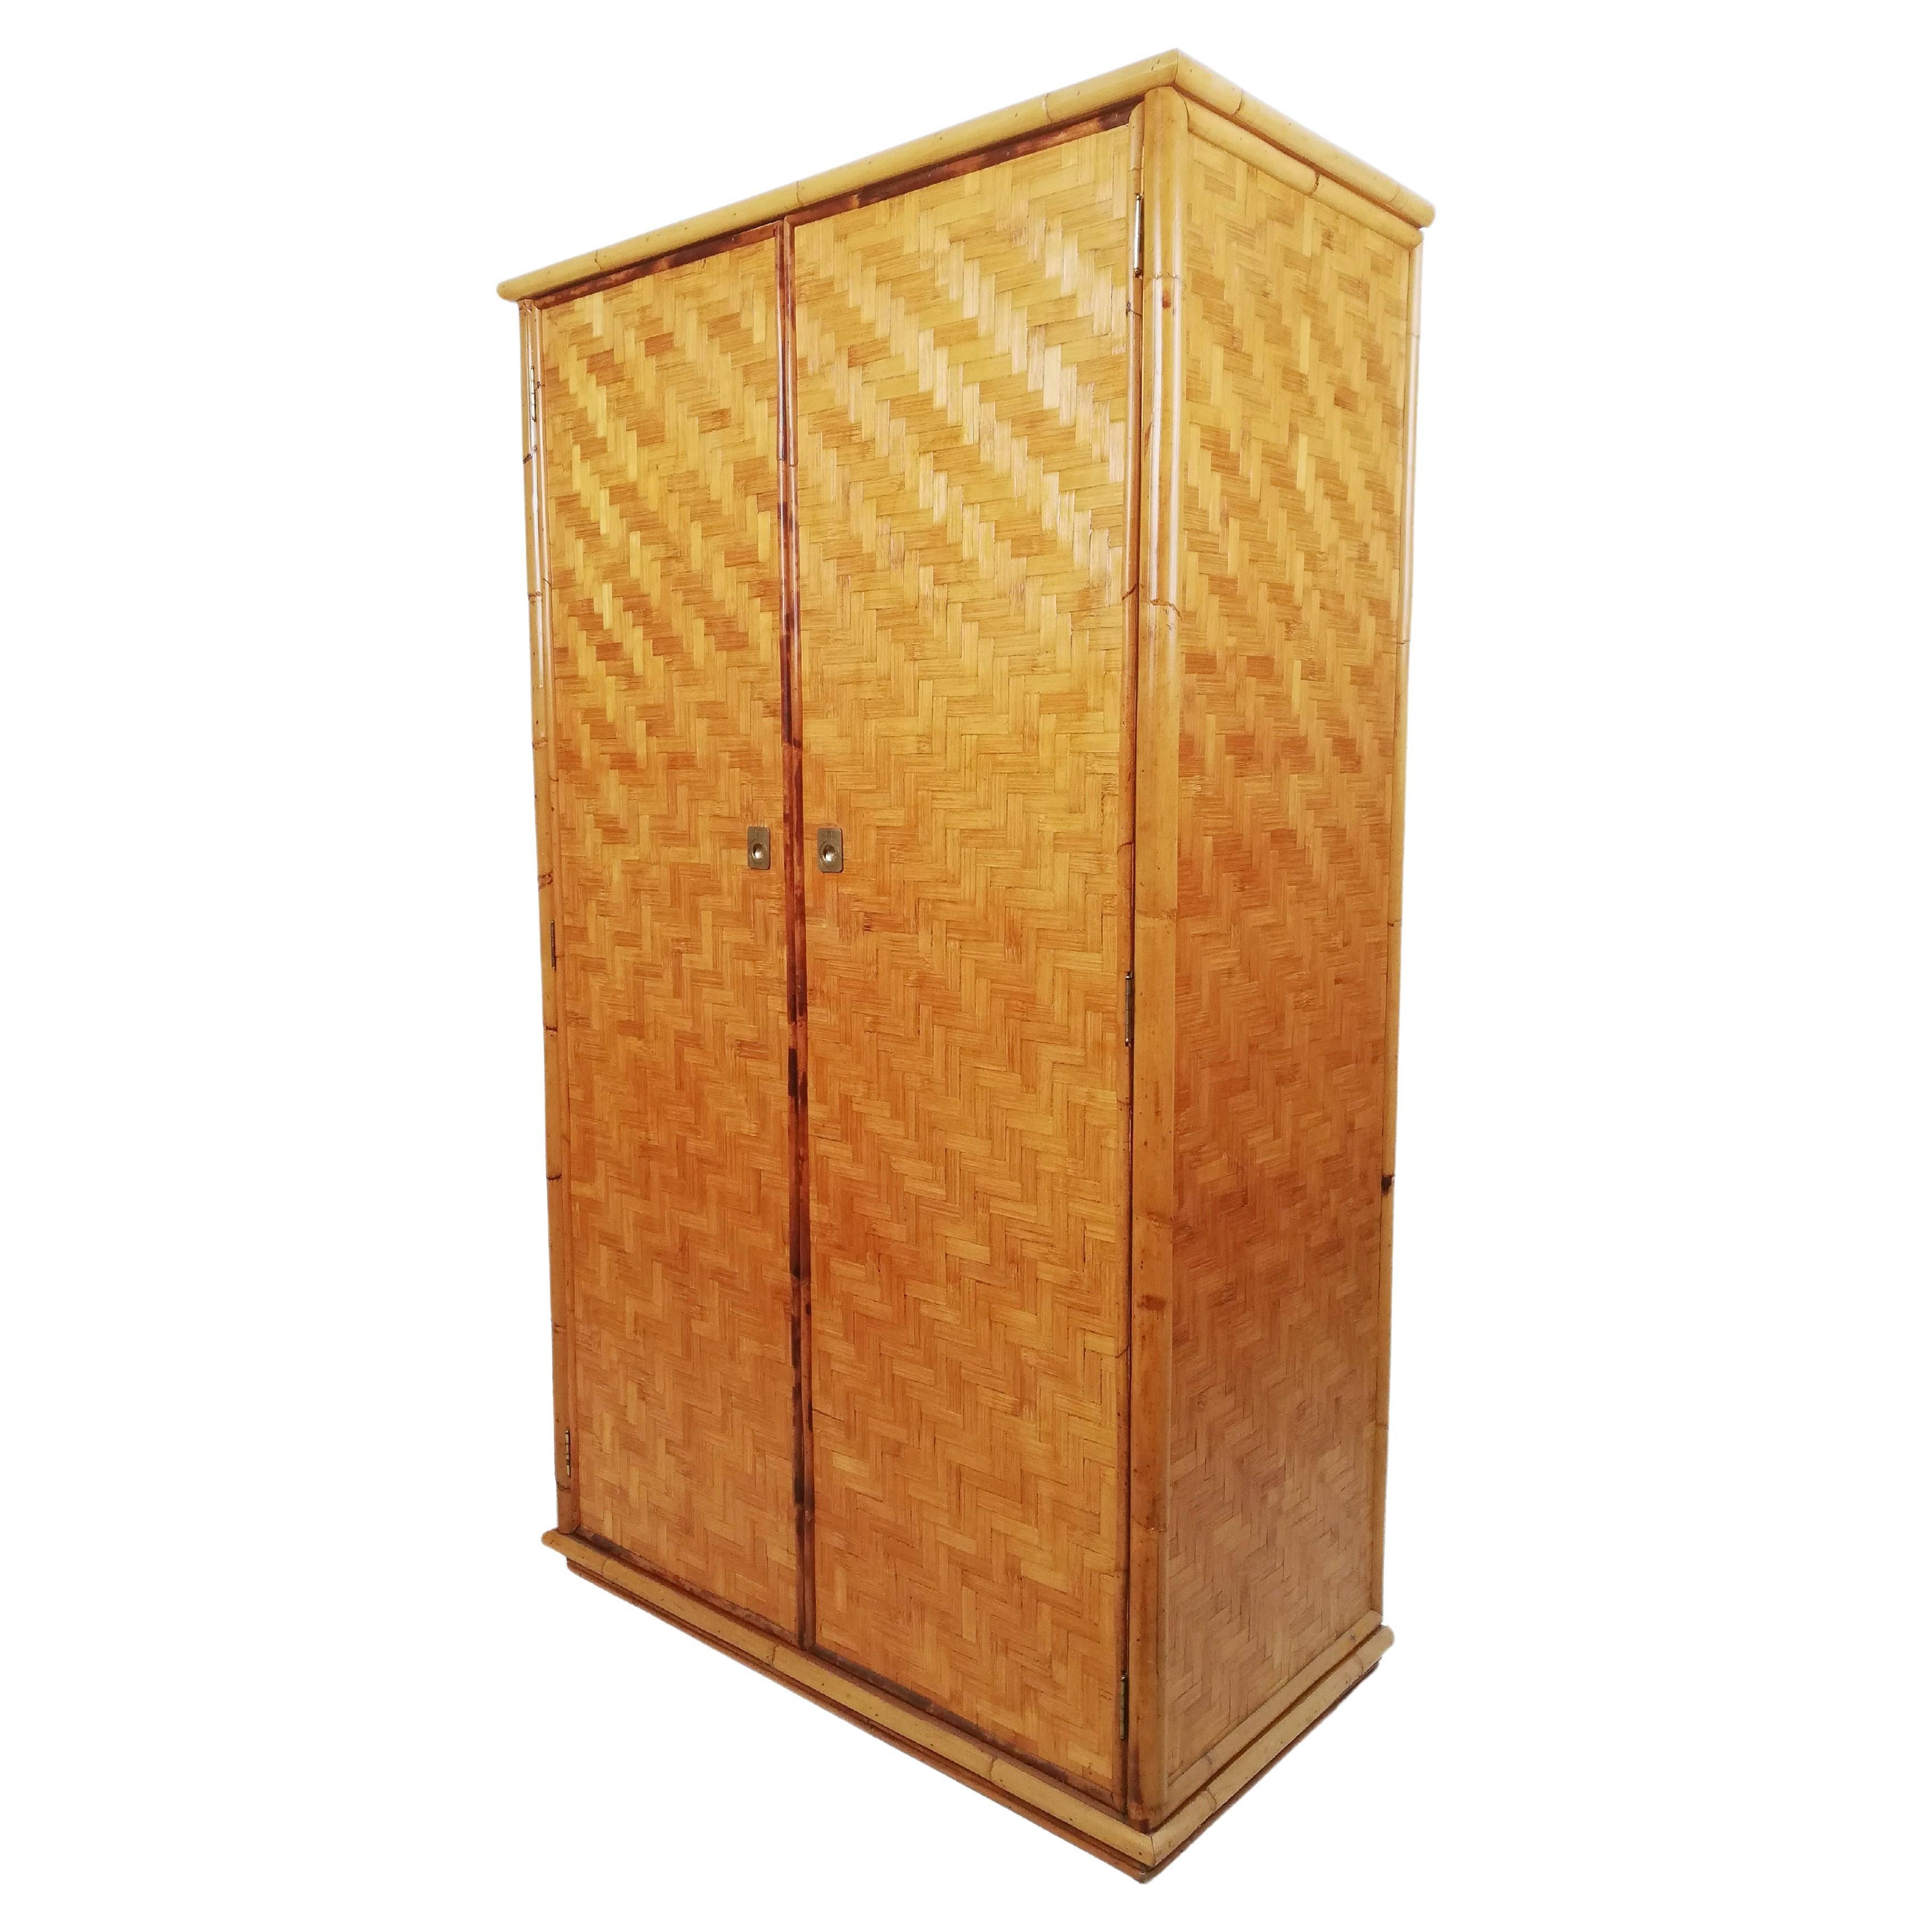 Vintage 2 Door Wardrobe in Wicker Cane, Rattan and Bamboo by Dal Vera, 1970s